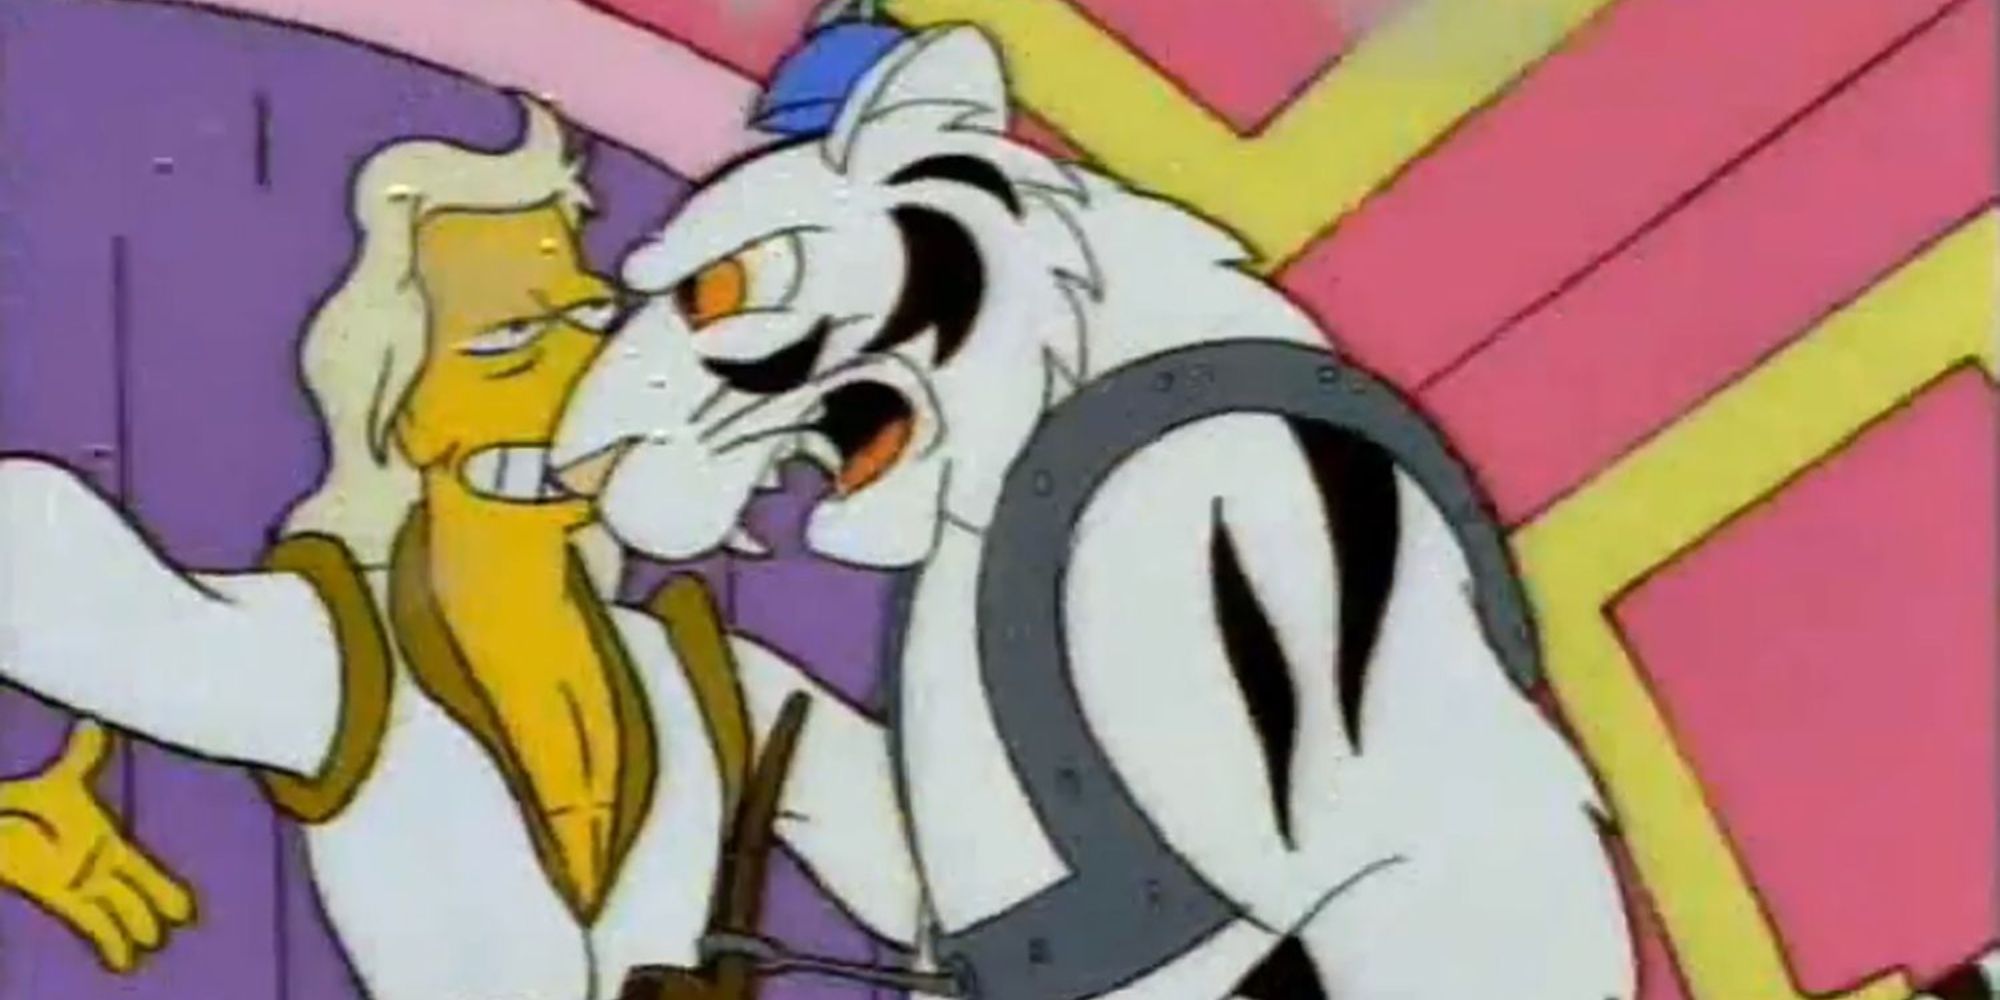 White tiger from the Siegfried & Roy Tiger Attack in The Simpsons